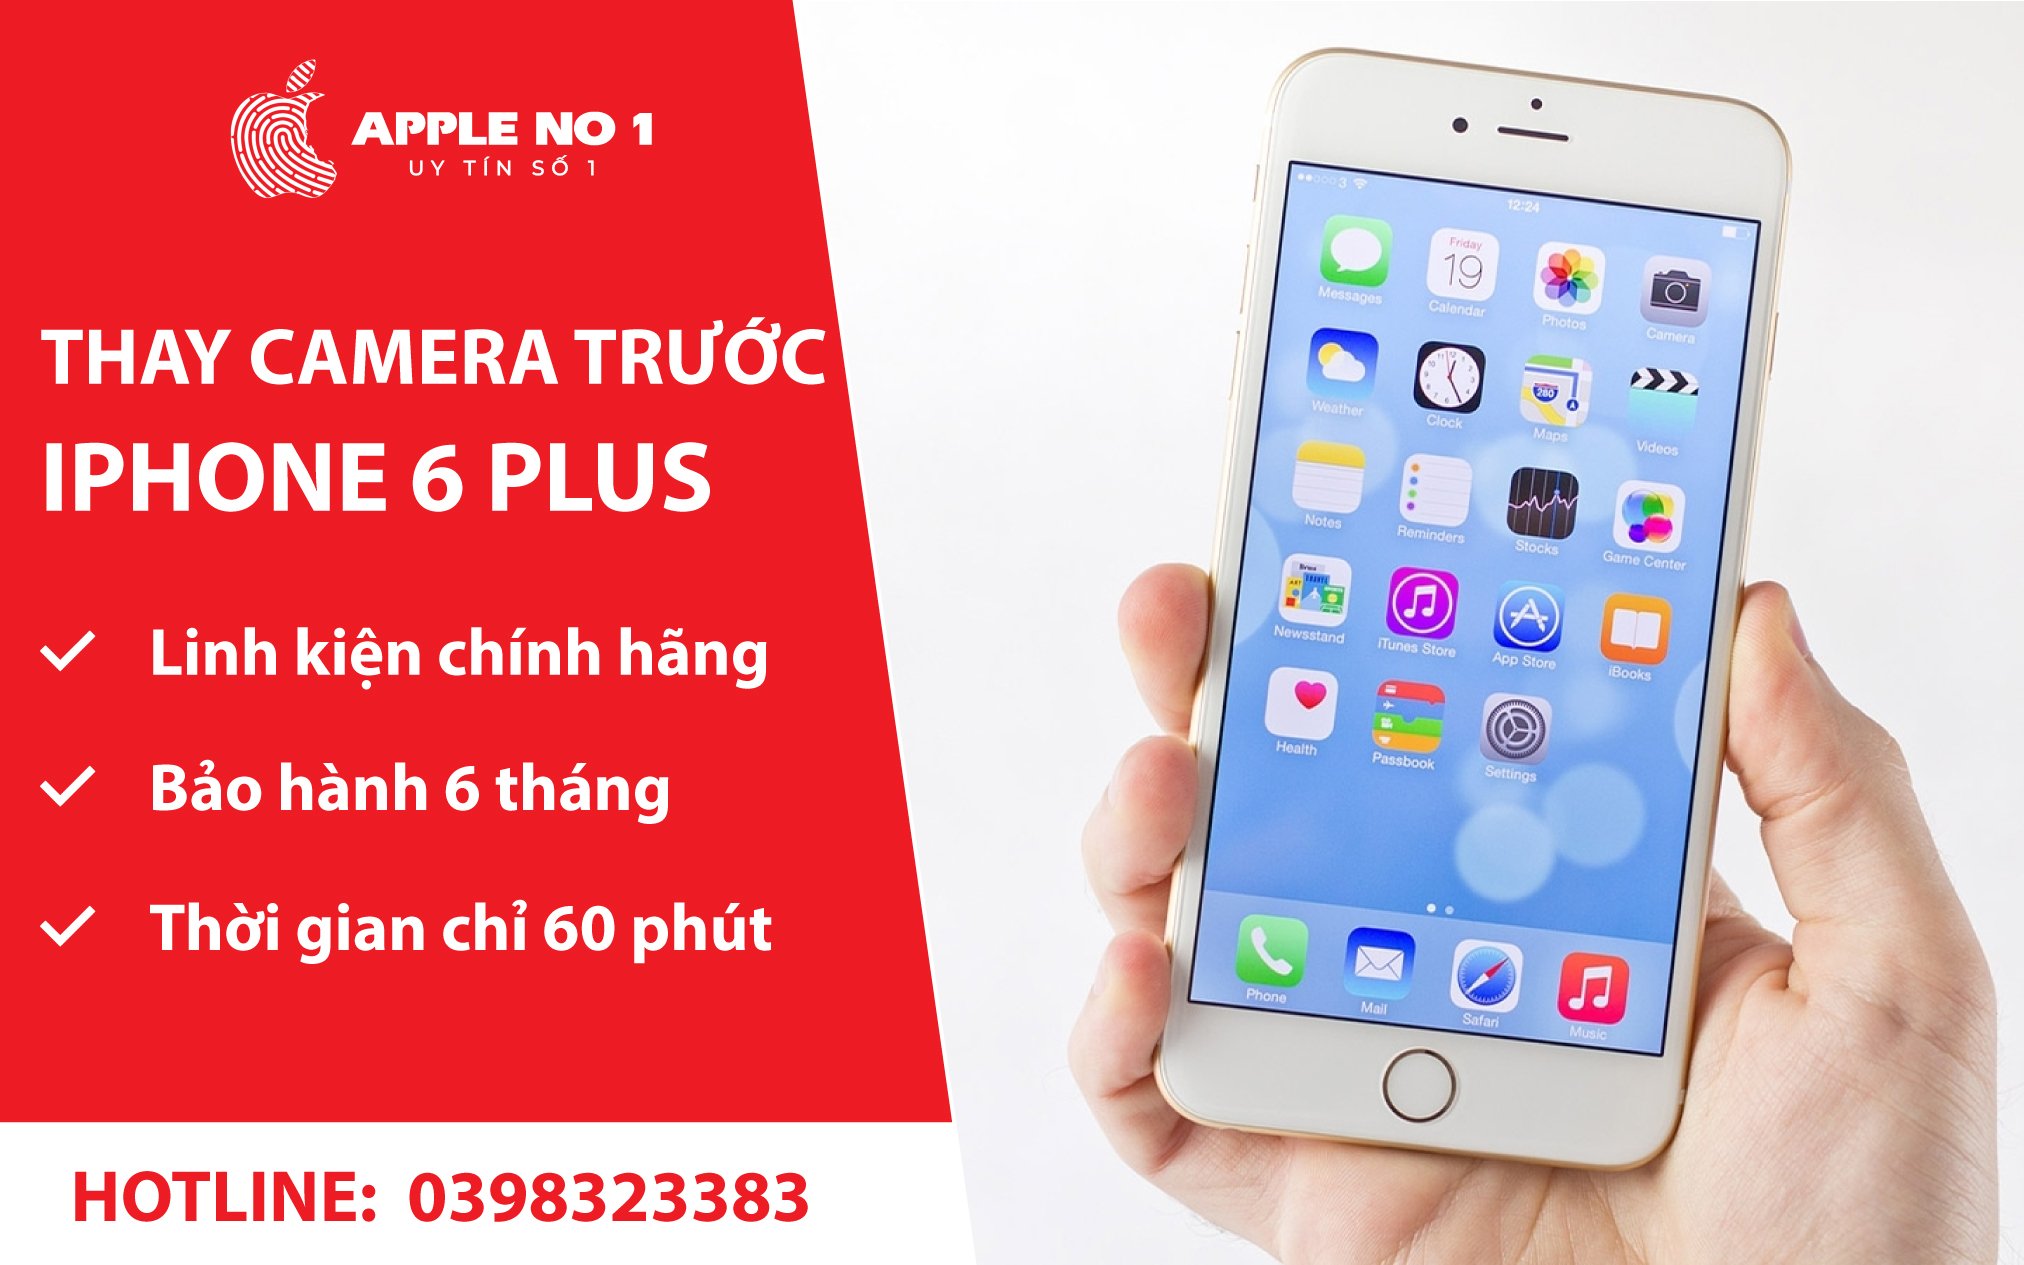 thay camera truoc iphone 6 plus chat luong tot nhat voi gia re, nhanh chong tai apple no.1